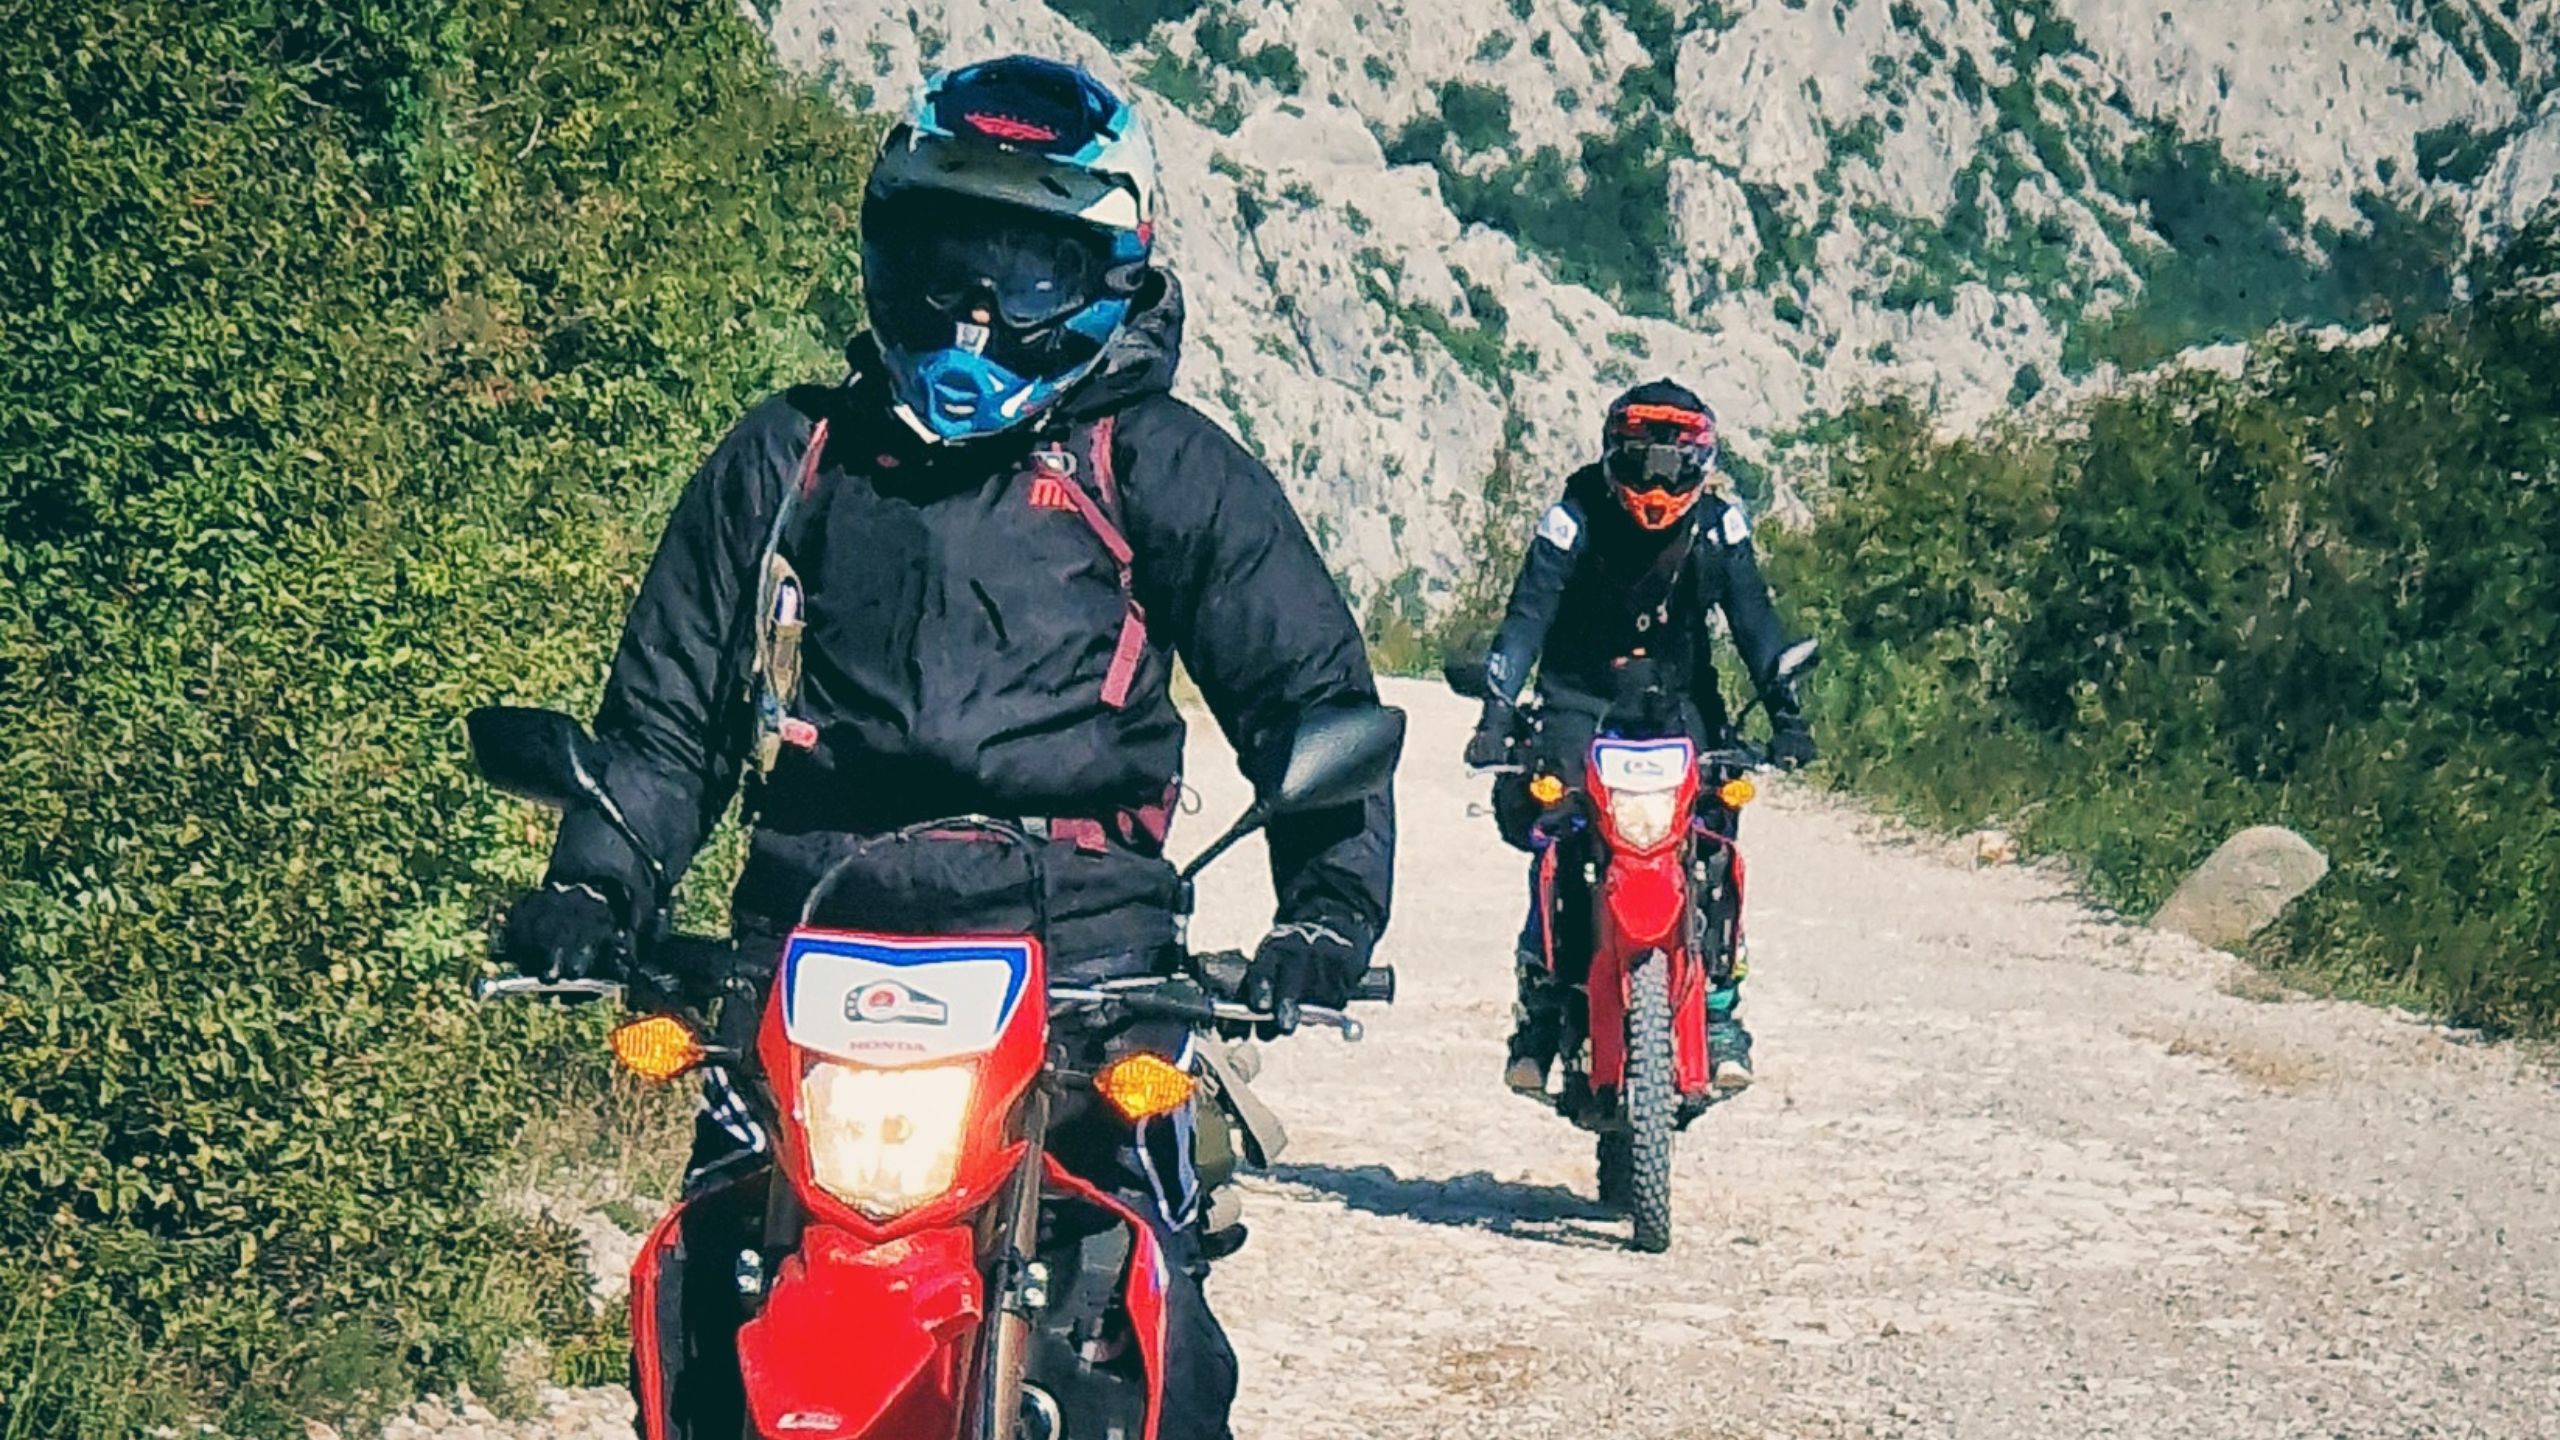 Funmoto ADVentures sightseeing 4 day only womens motorcycle tour in Croatia adventure bikers